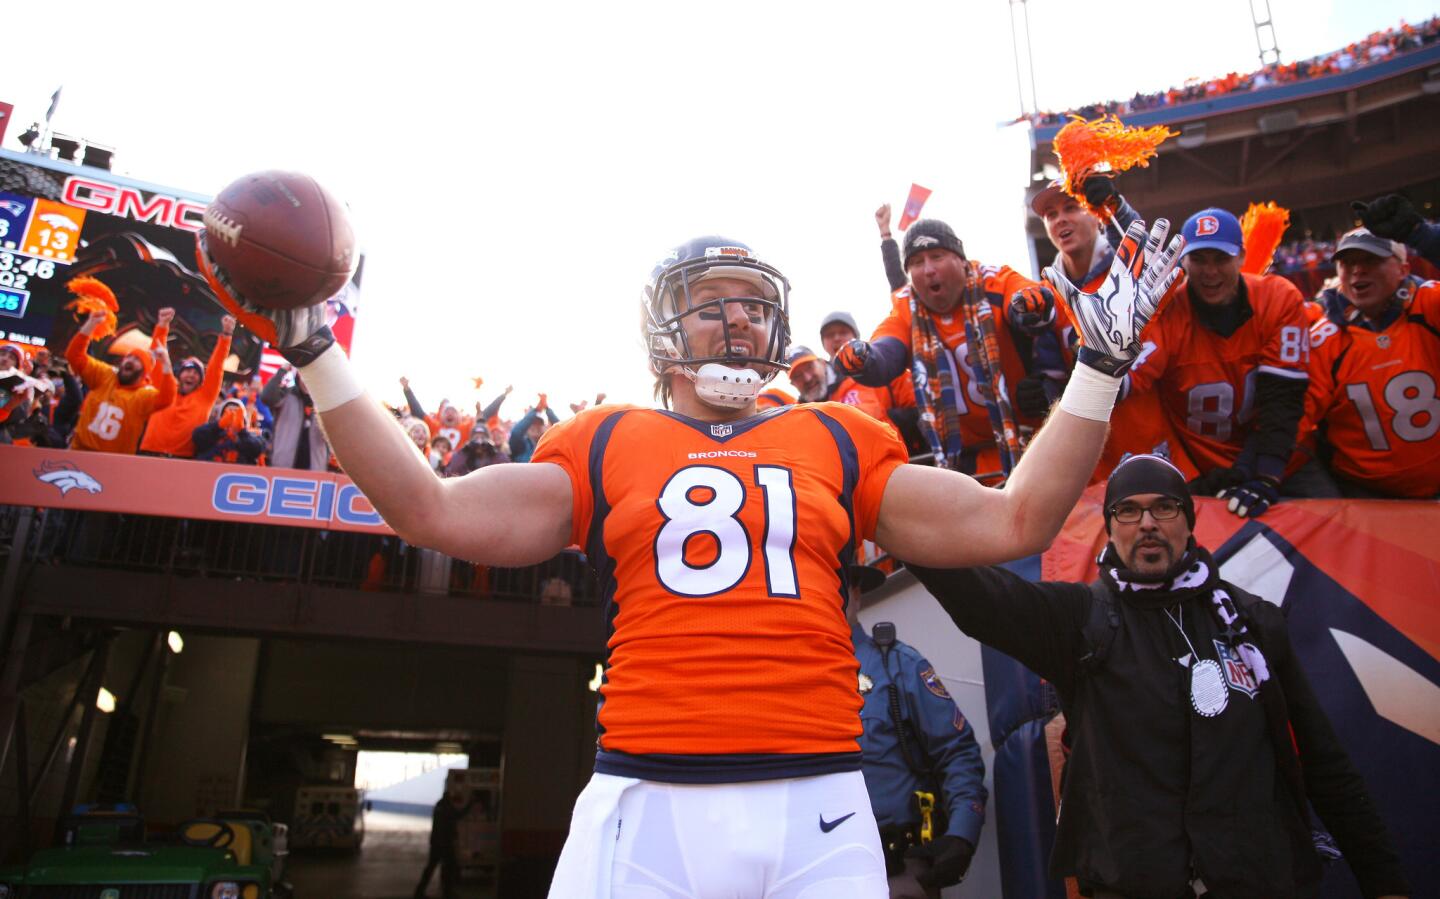 Broncos tight end Owen Daniels celebrates after scoring on a 12-yard touchdown reception during the second quarter of the AFC Championship game against the Patriots on Jan. 24.